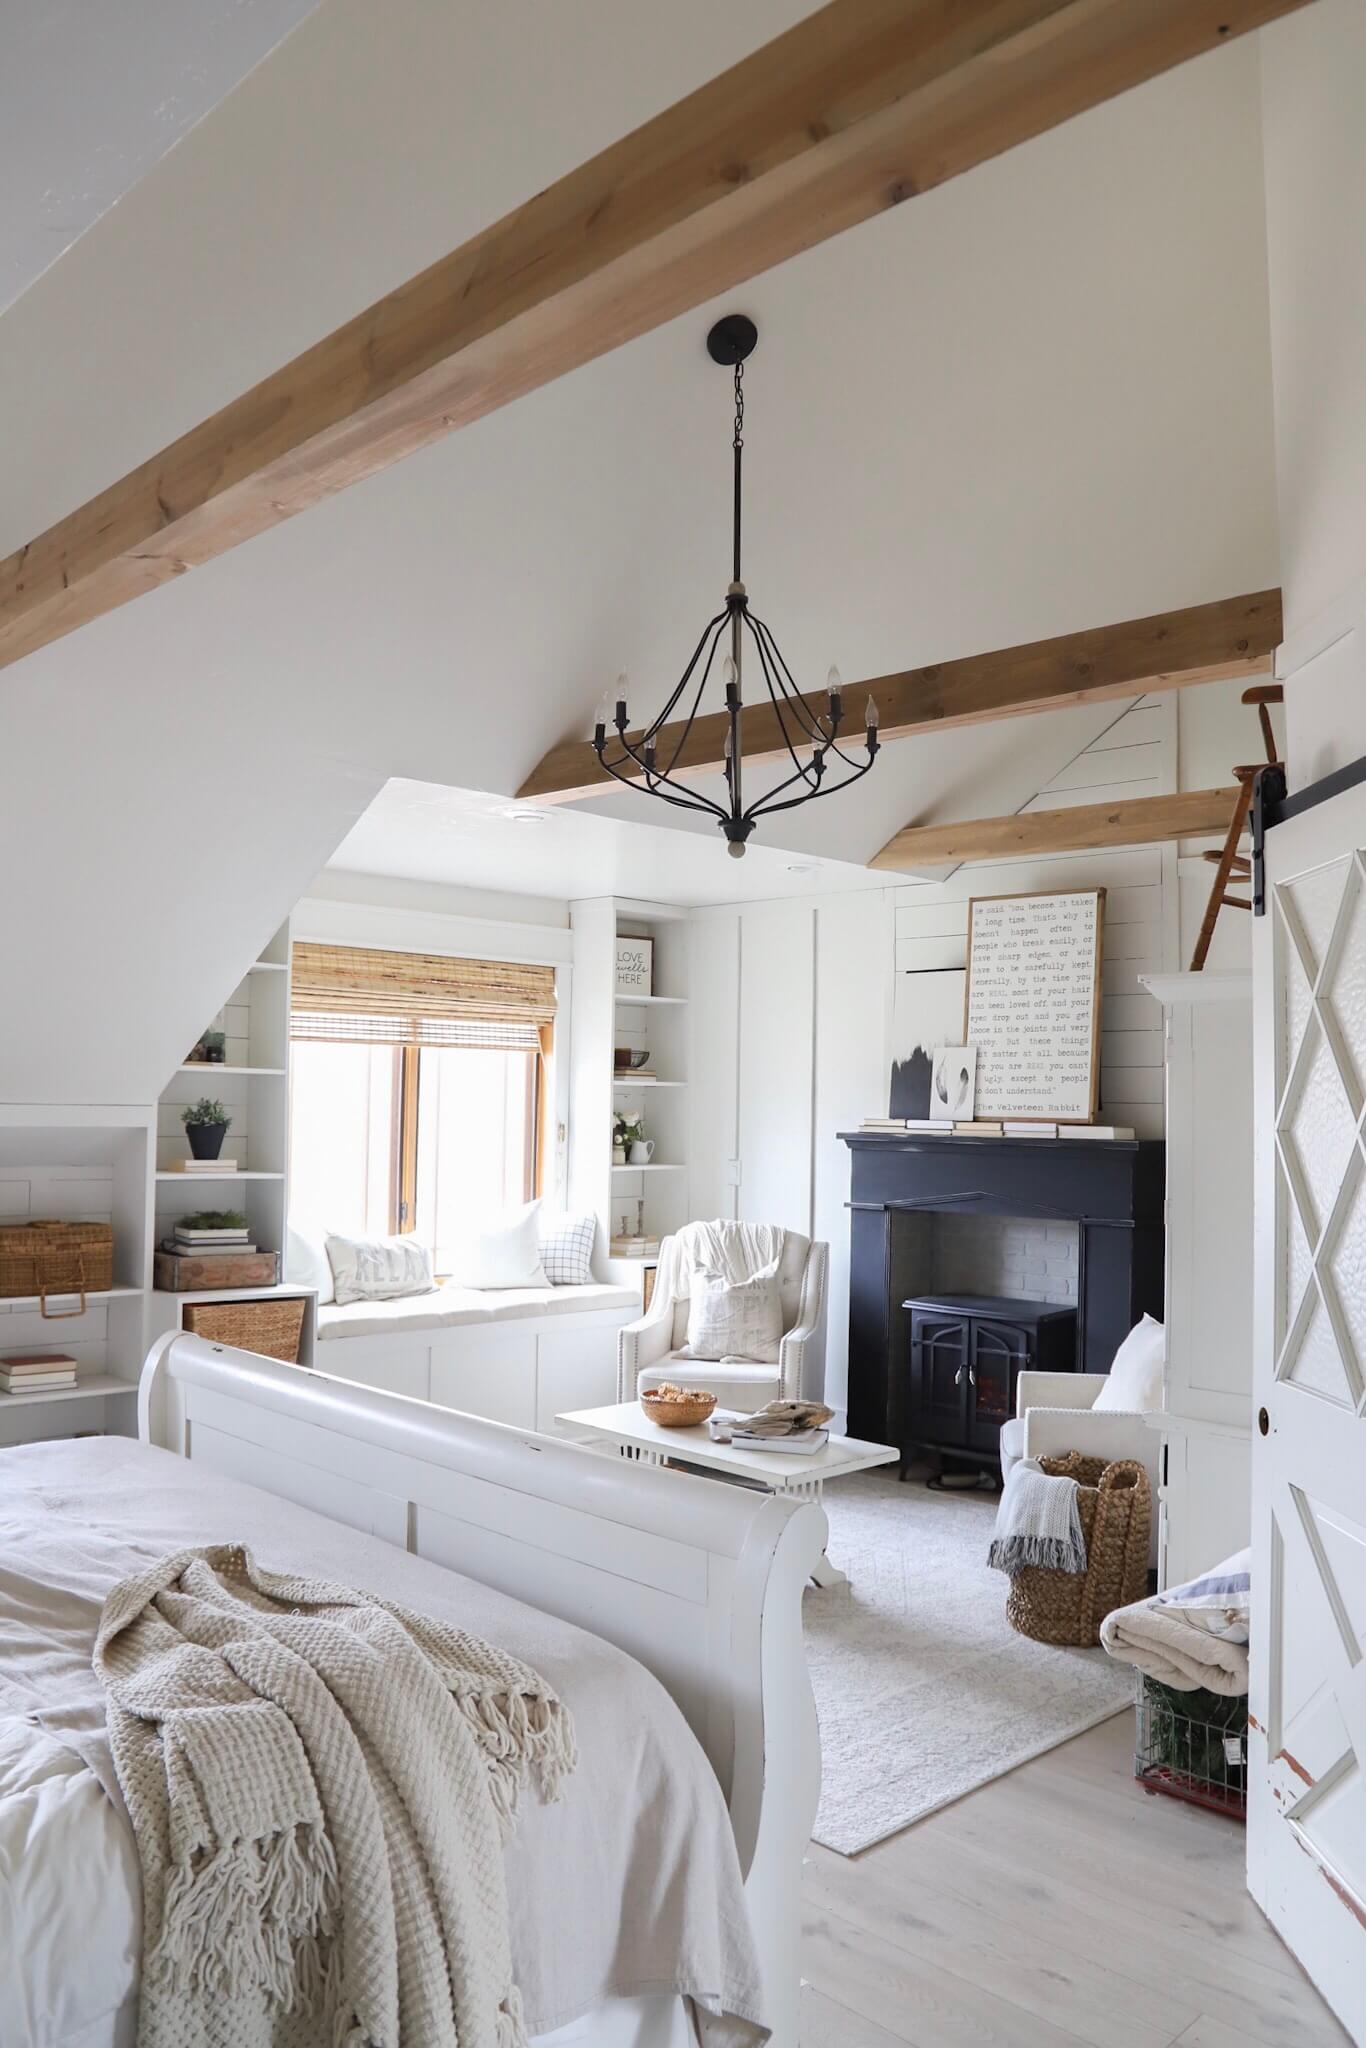 Gorgeous master bedroom retreat with exposed beams, a farmhouse style fireplace and so much more!